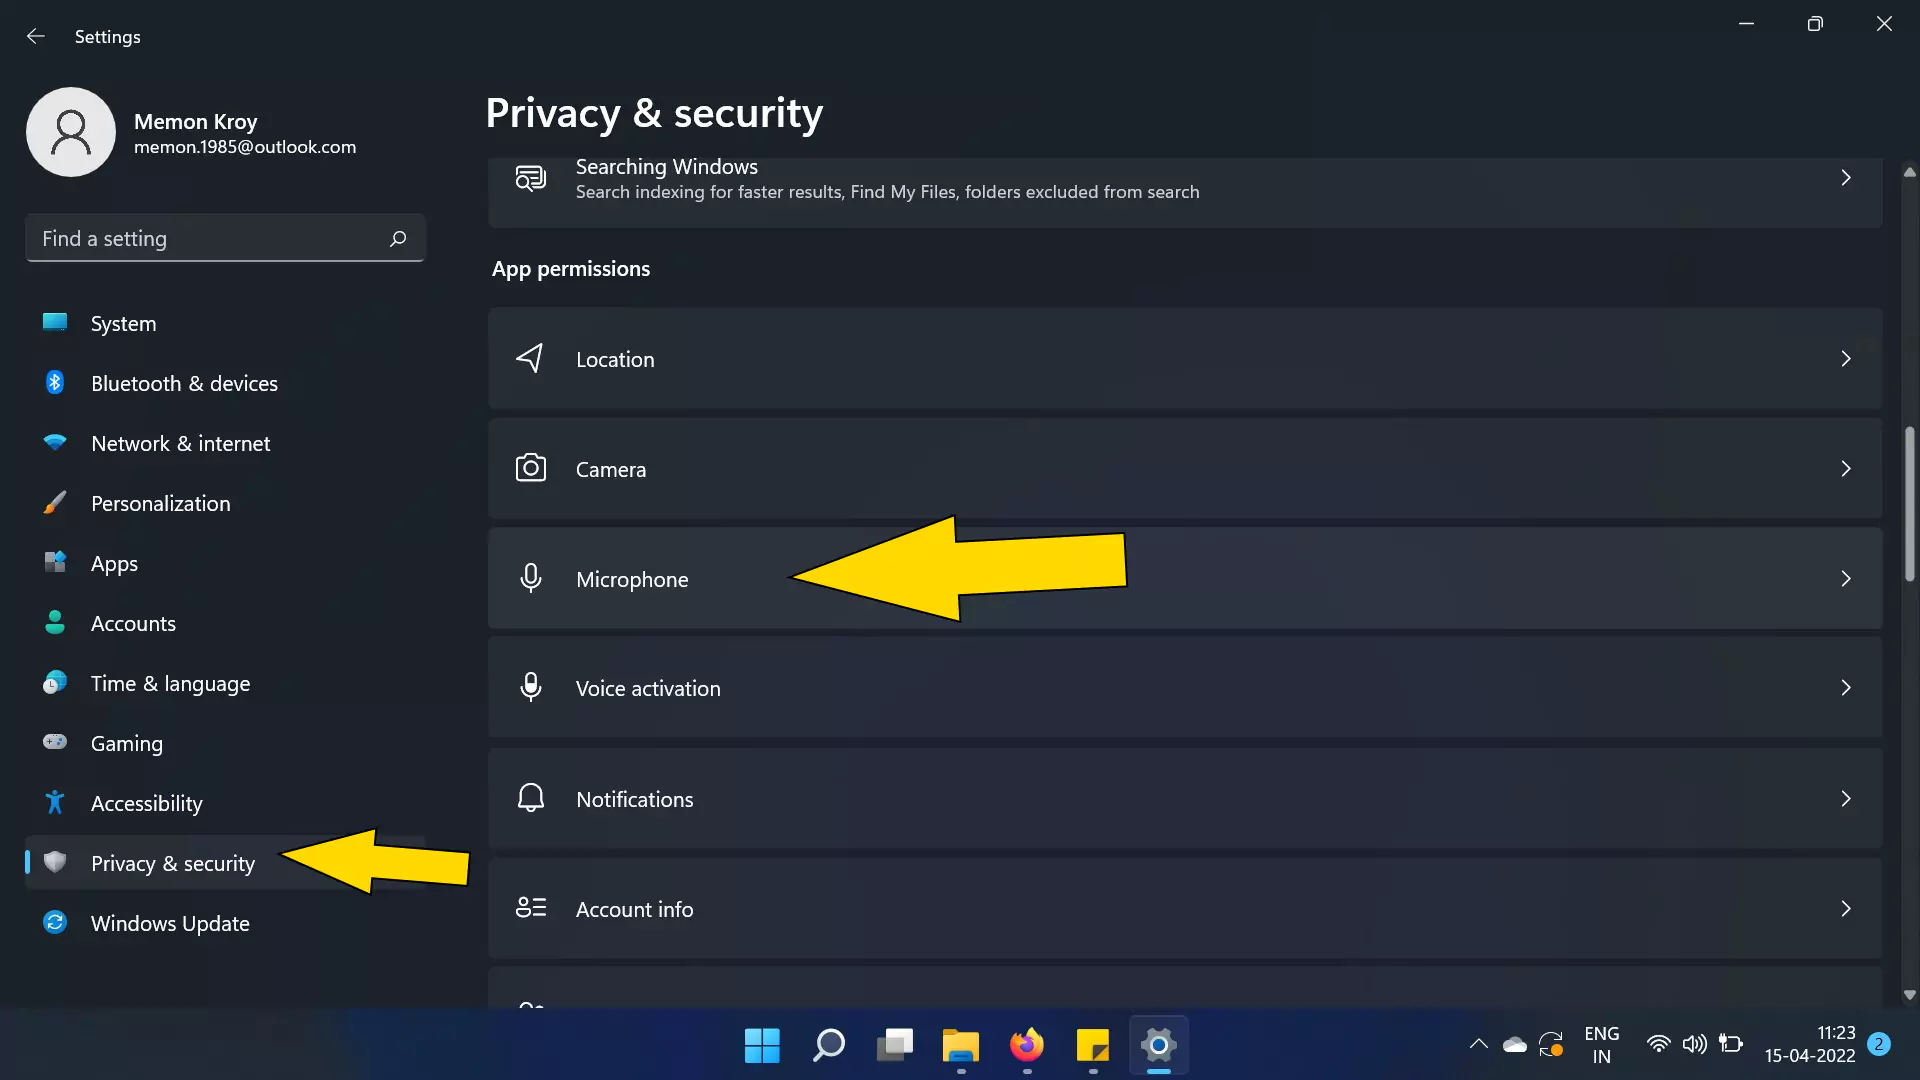 microphone-settings-under-the-privacy-and-security-option-in-windows-11